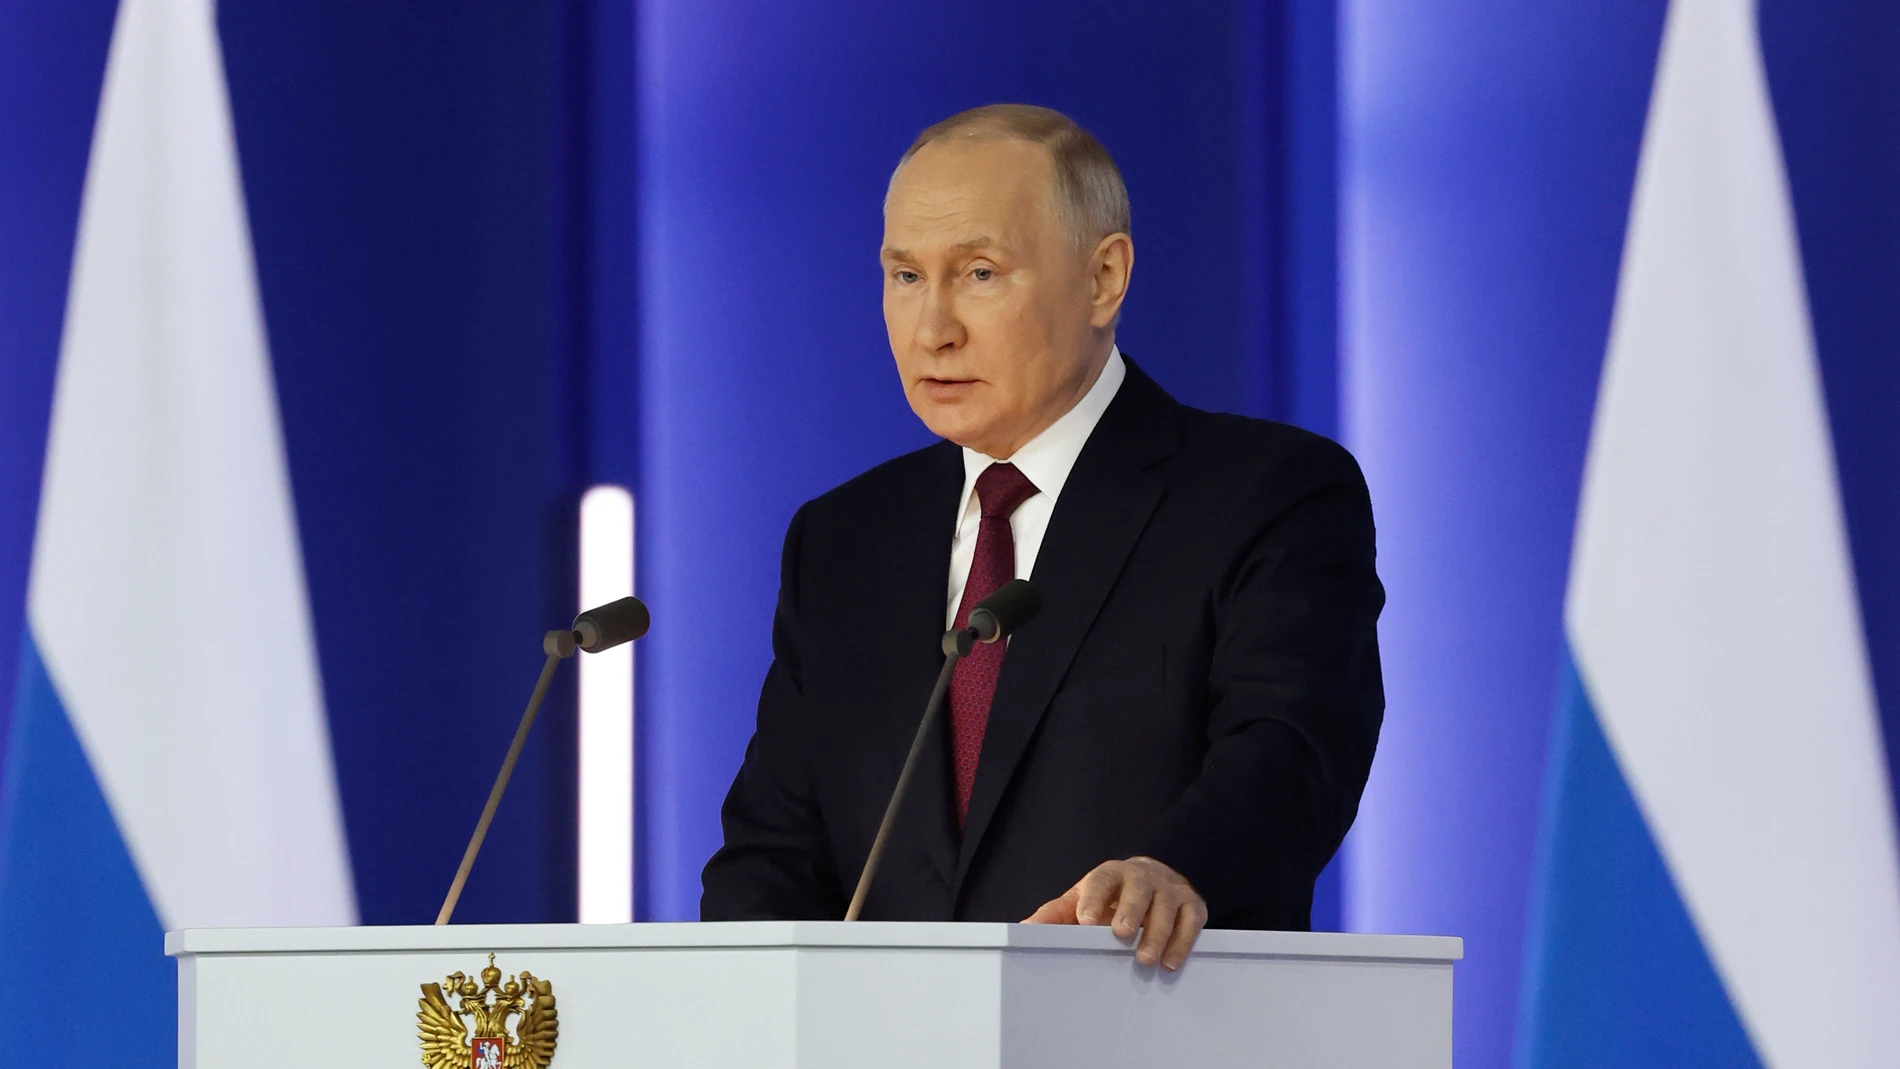 Moscow (Russian Federation), 20/02/2023.- Russia's President Vladimir Putin delivers his annual address before the Federal Assembly at the Gostiny Dvor conference center in Moscow, Russia, 21 February 2023. 'The goal of the West is to inflict a strategic defeat on Russia, to end us once and for all. We will react accordingly, because we are talking about the existence of our country', Putin said during his state of the nation address. About 1,200 people, including lawmakers of Russia'Äôs two-chamber parliament, Government members, heads of the Constitutional and Supreme court, and regional governors, were invited to attend the event. (Rusia, Moscú) EFE/EPA/DMITRY ASTAKHOV / SPUTNIK / GOVERNMENT PRESS SERVICE POOL MANDATORY CREDIT 